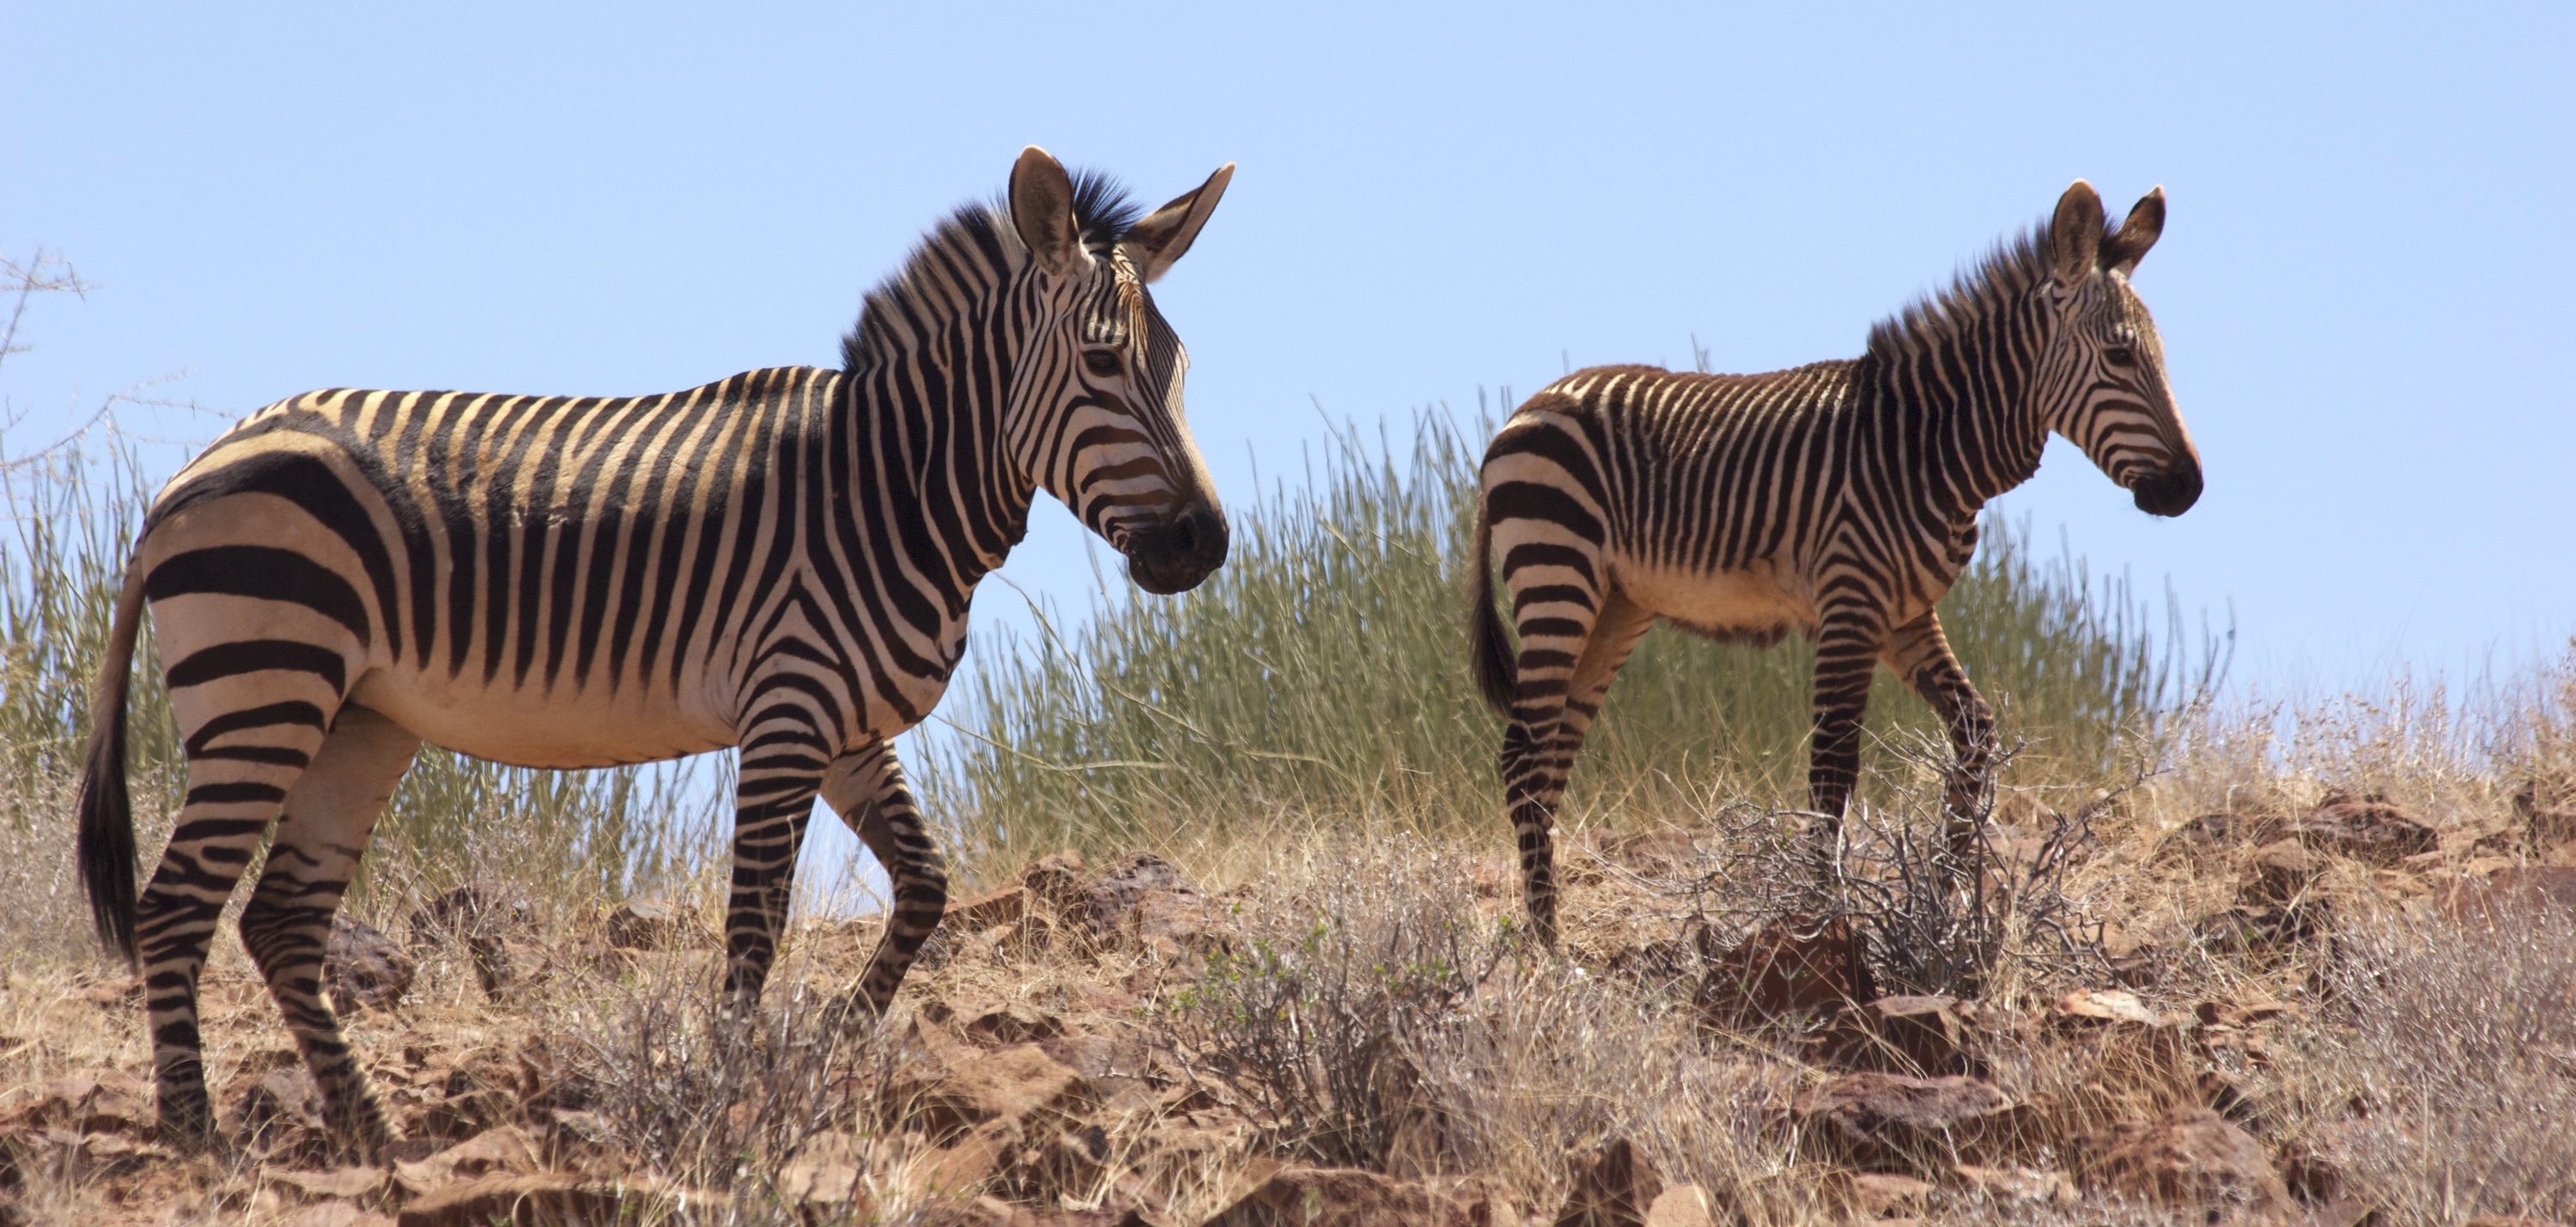 Two zebra; an adult, and a sub-adult standing on rocky ground.